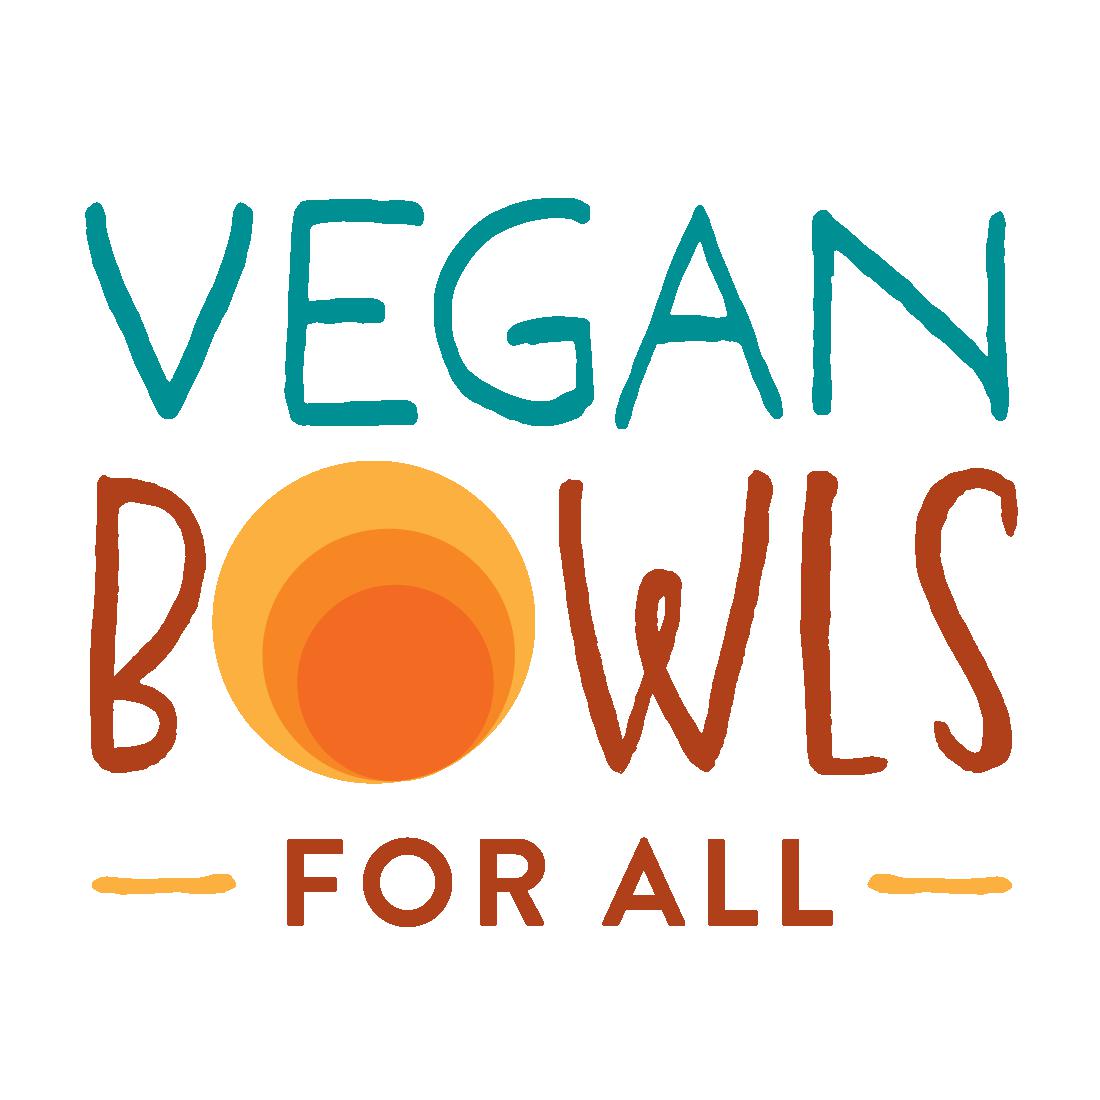 Vegan Bowls For All - The Dome Los Angeles